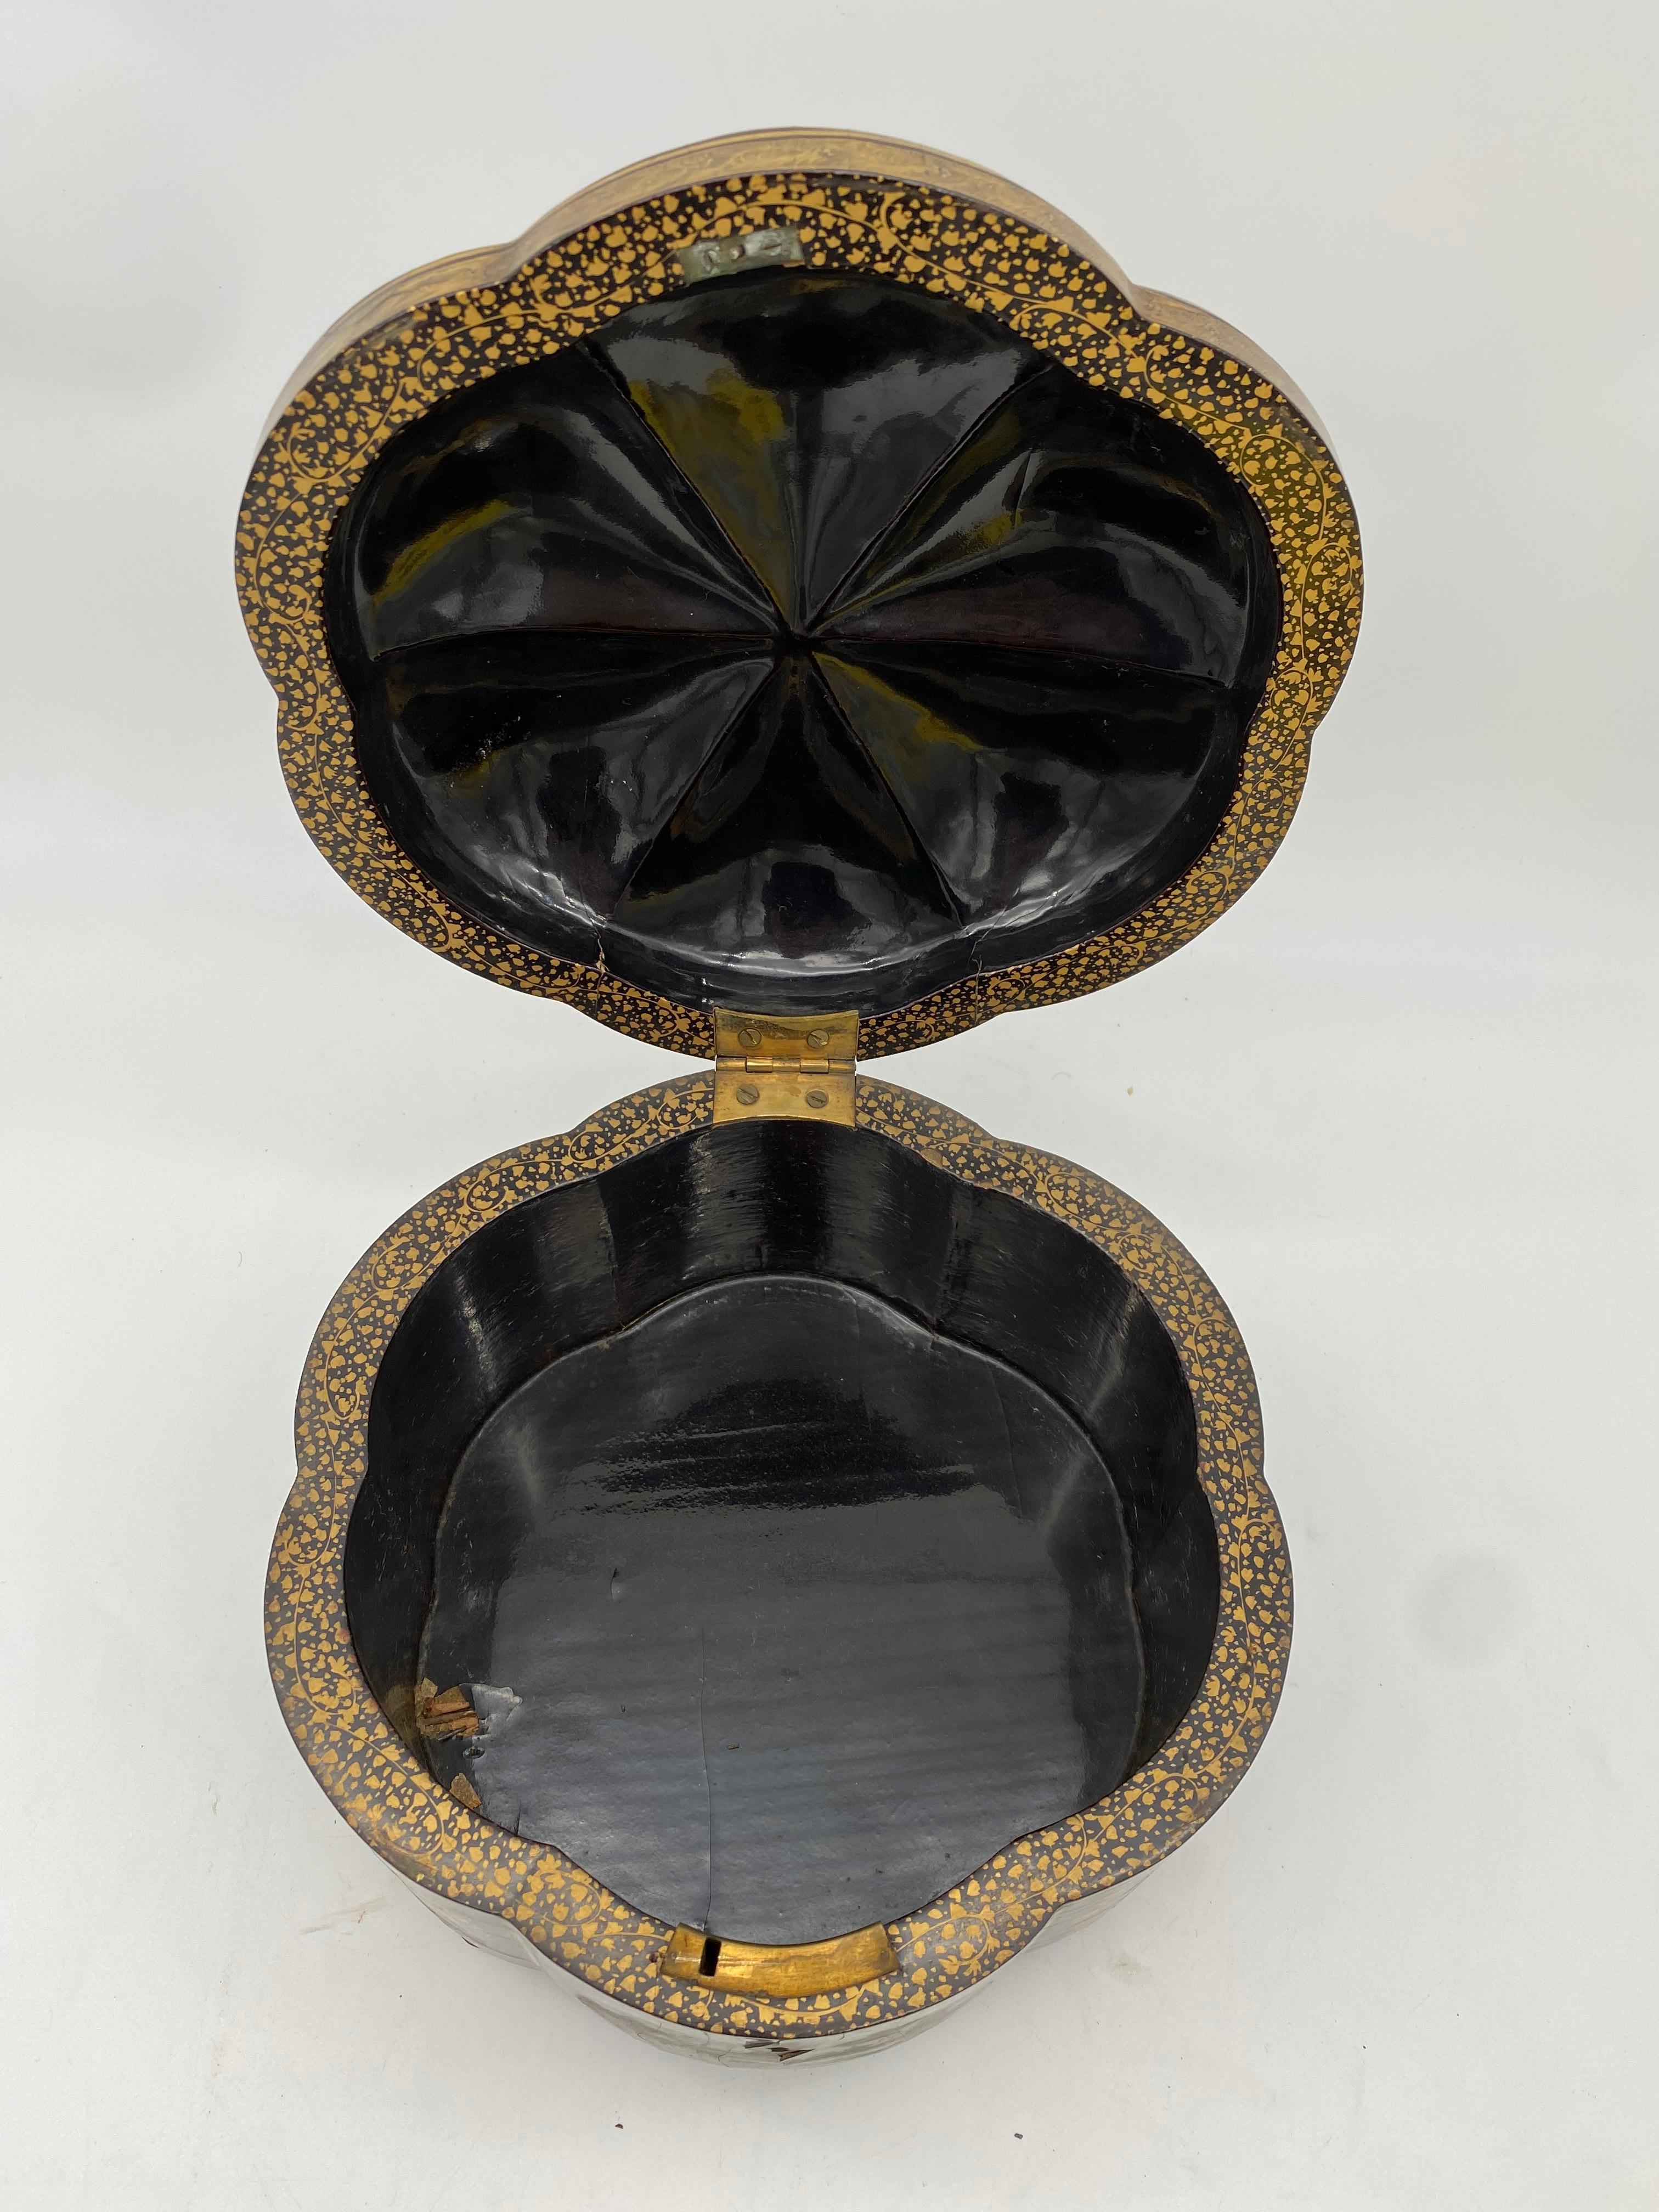 19th Century a Unique Gilt Chinese Lacquer Tea Caddy For Sale 7